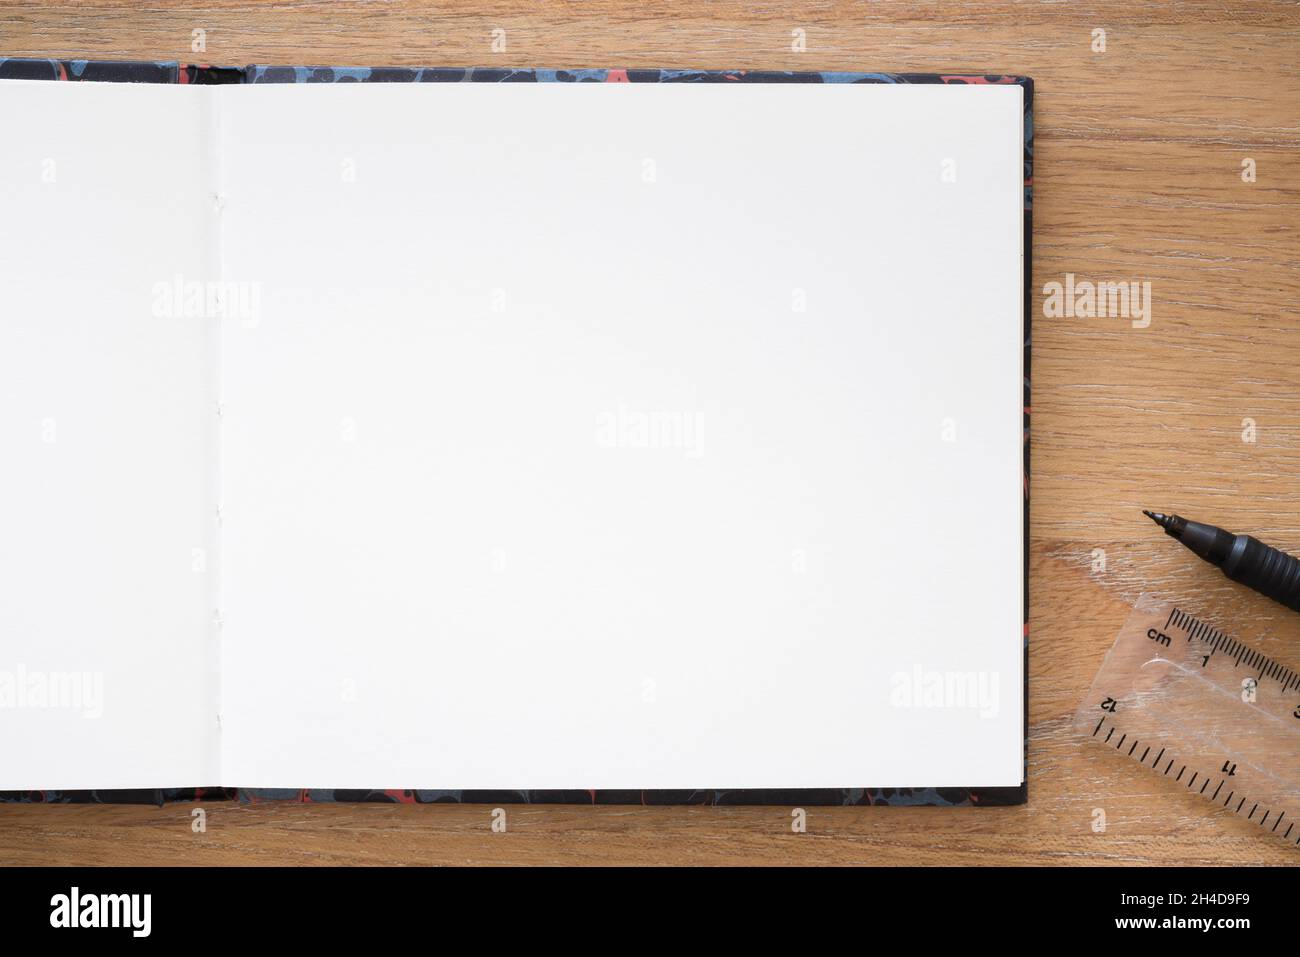 Plain empty notebook or sketchbook background or template. Flat lay on a wooden desk, bullet journal or journaling concept with empty blank white page Stock Photo